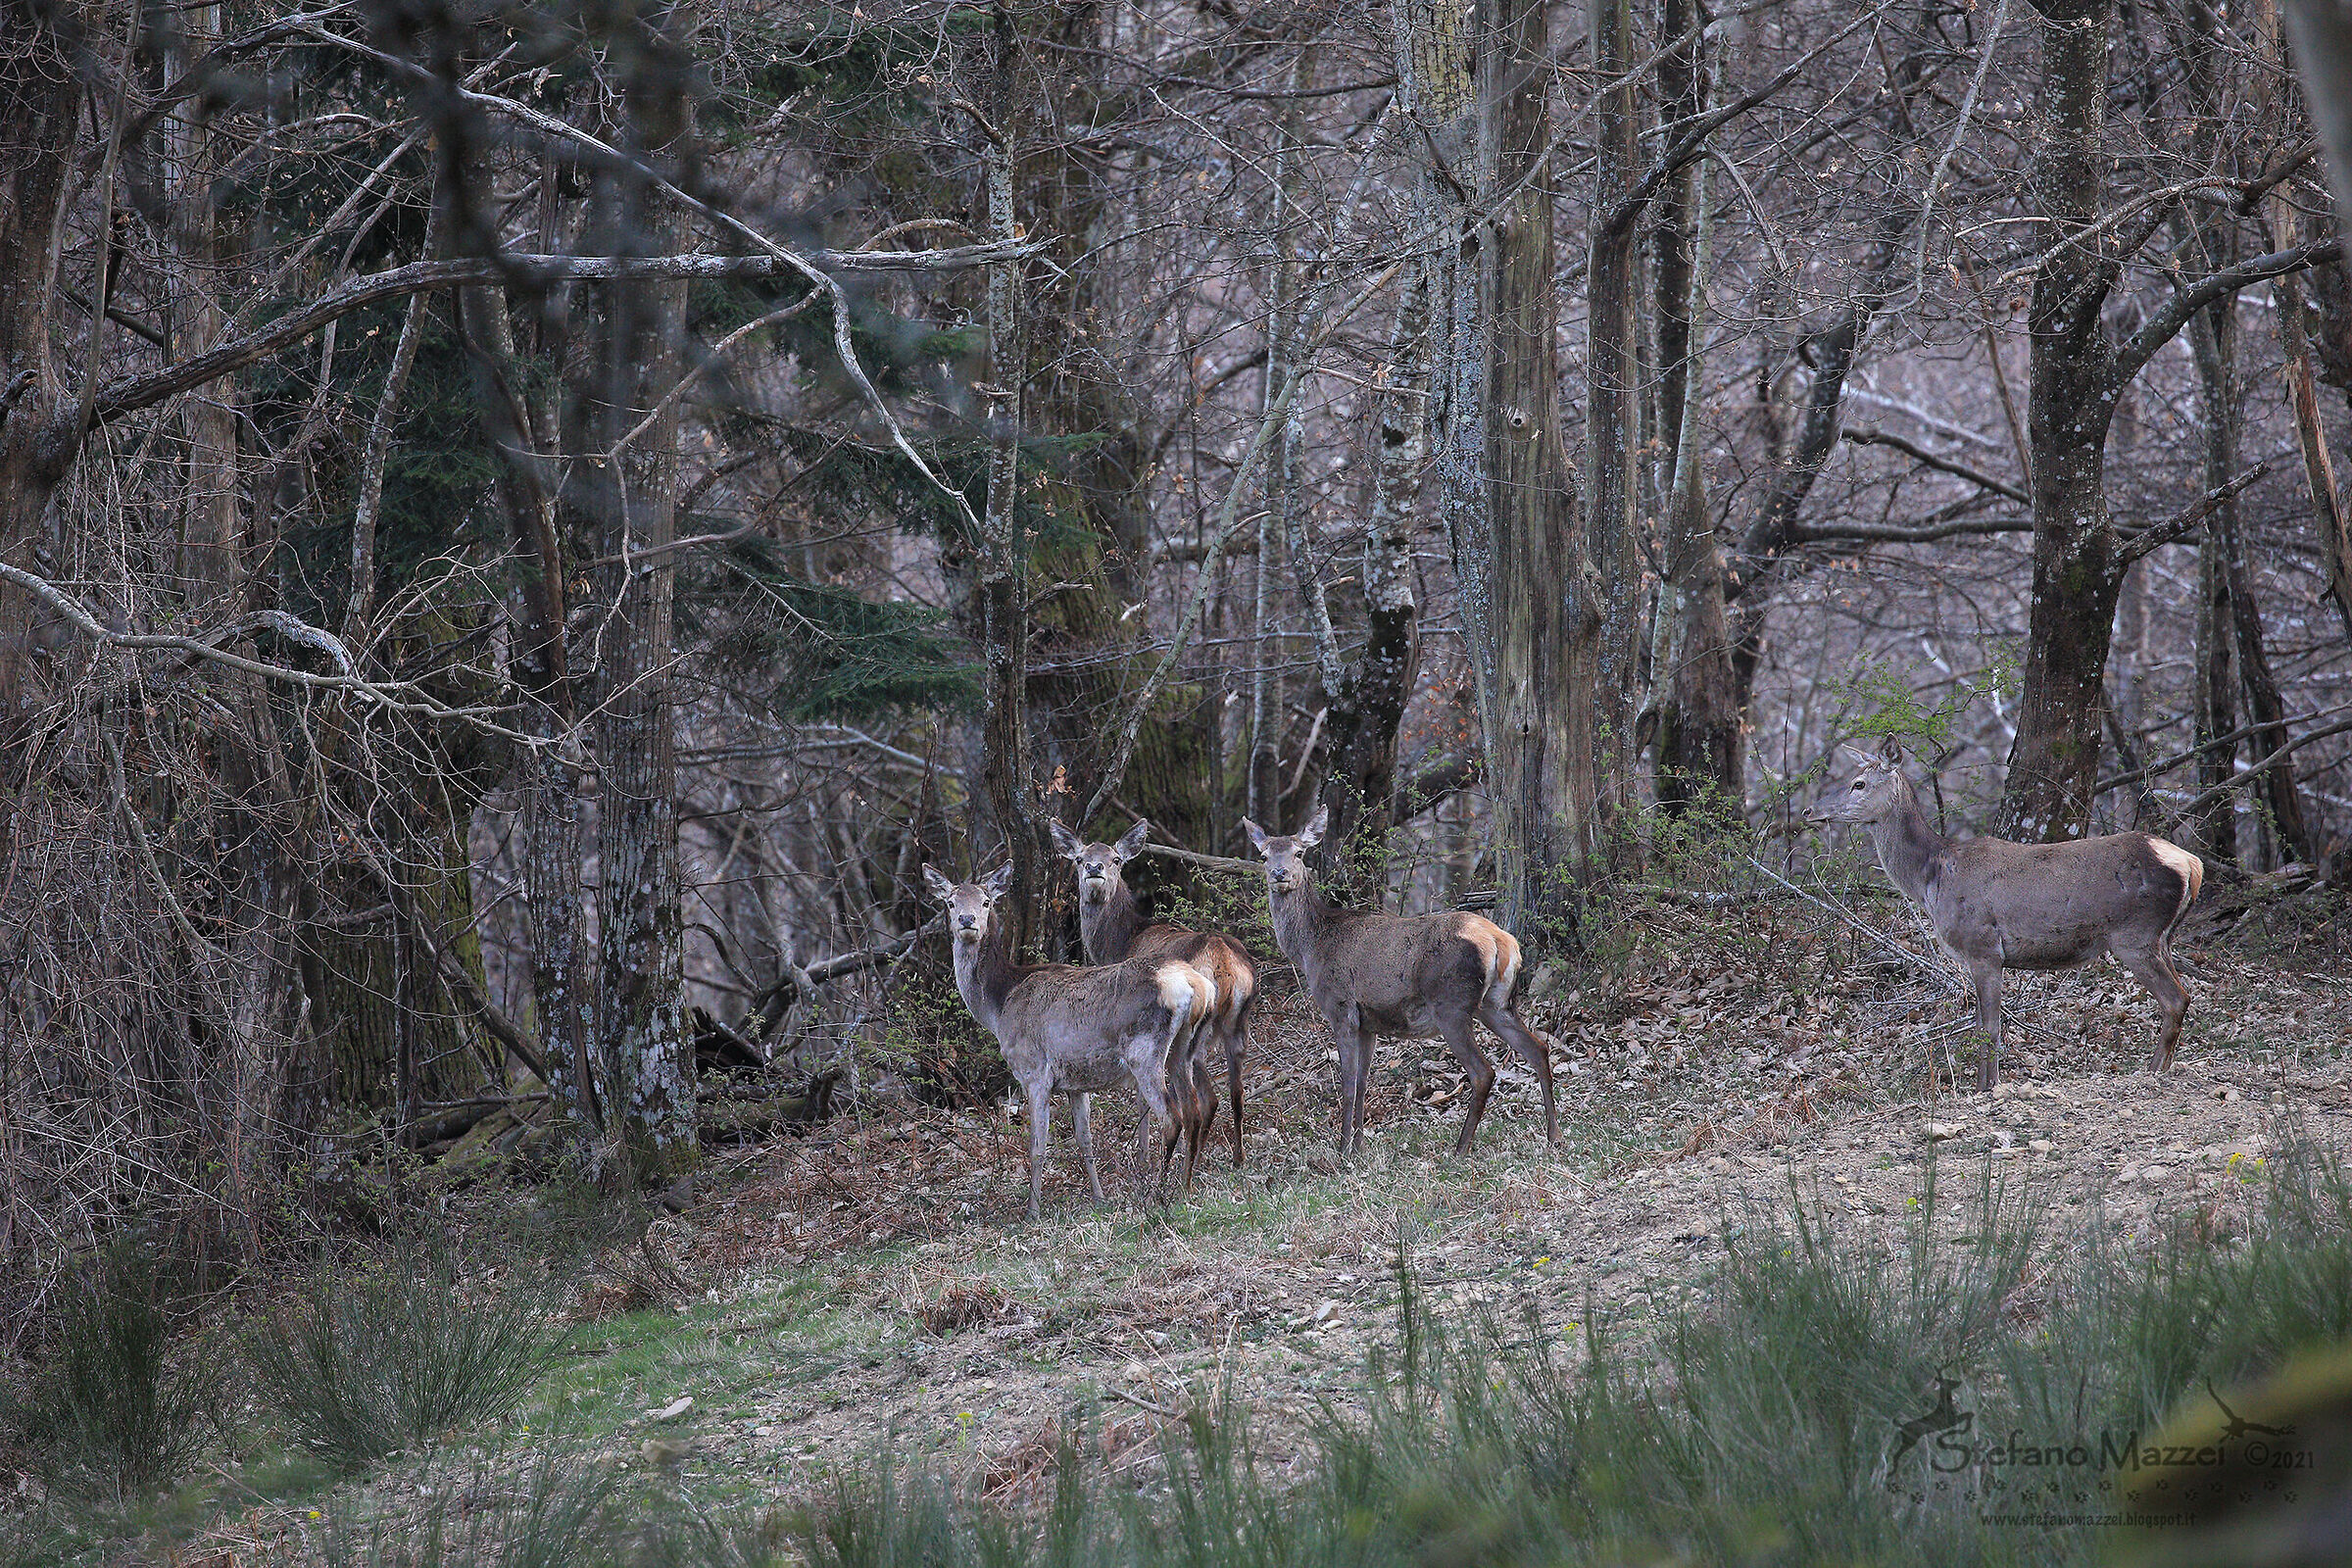 Deer with young people...